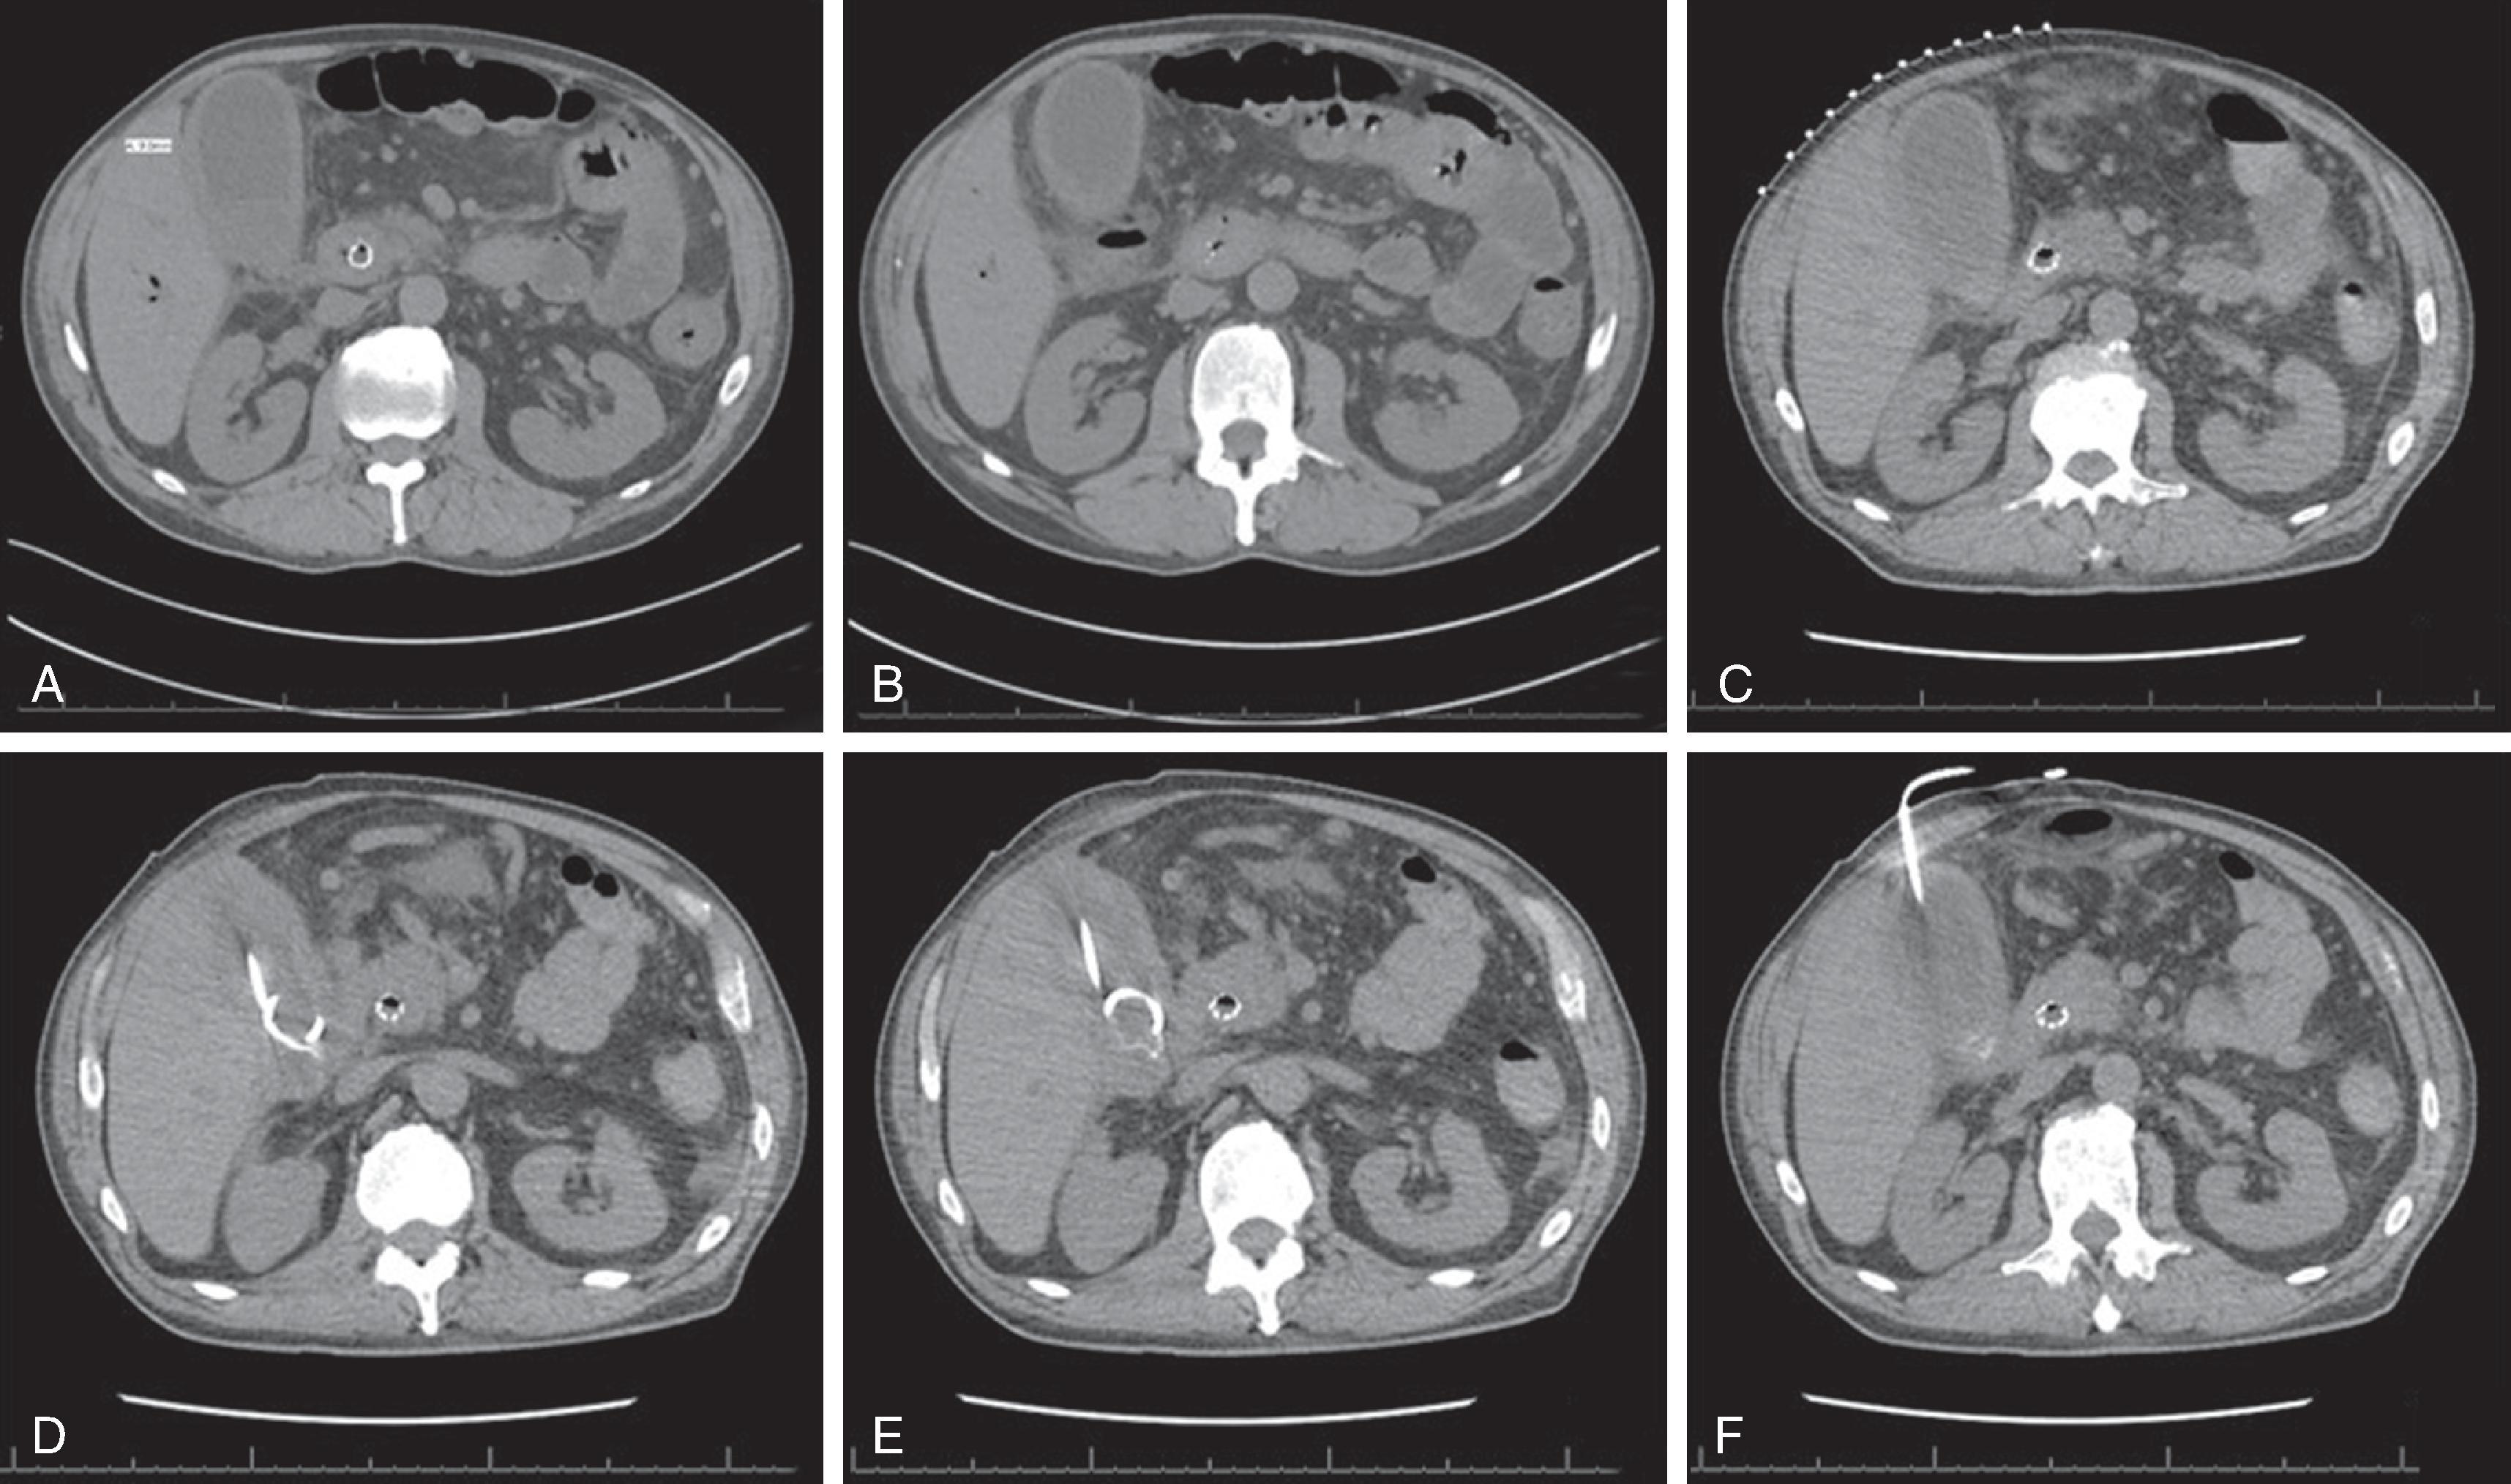 FIG. 4, Computed tomography placement of a cholecystostomy tube. (A, B) Gallbladder is visualized. (C) Computed tomography markers are placed on the abdominal skin on the right upper quadrant to help with guidance. (D–F) Verification of pigtail catheter placement in the gallbladder lumen.